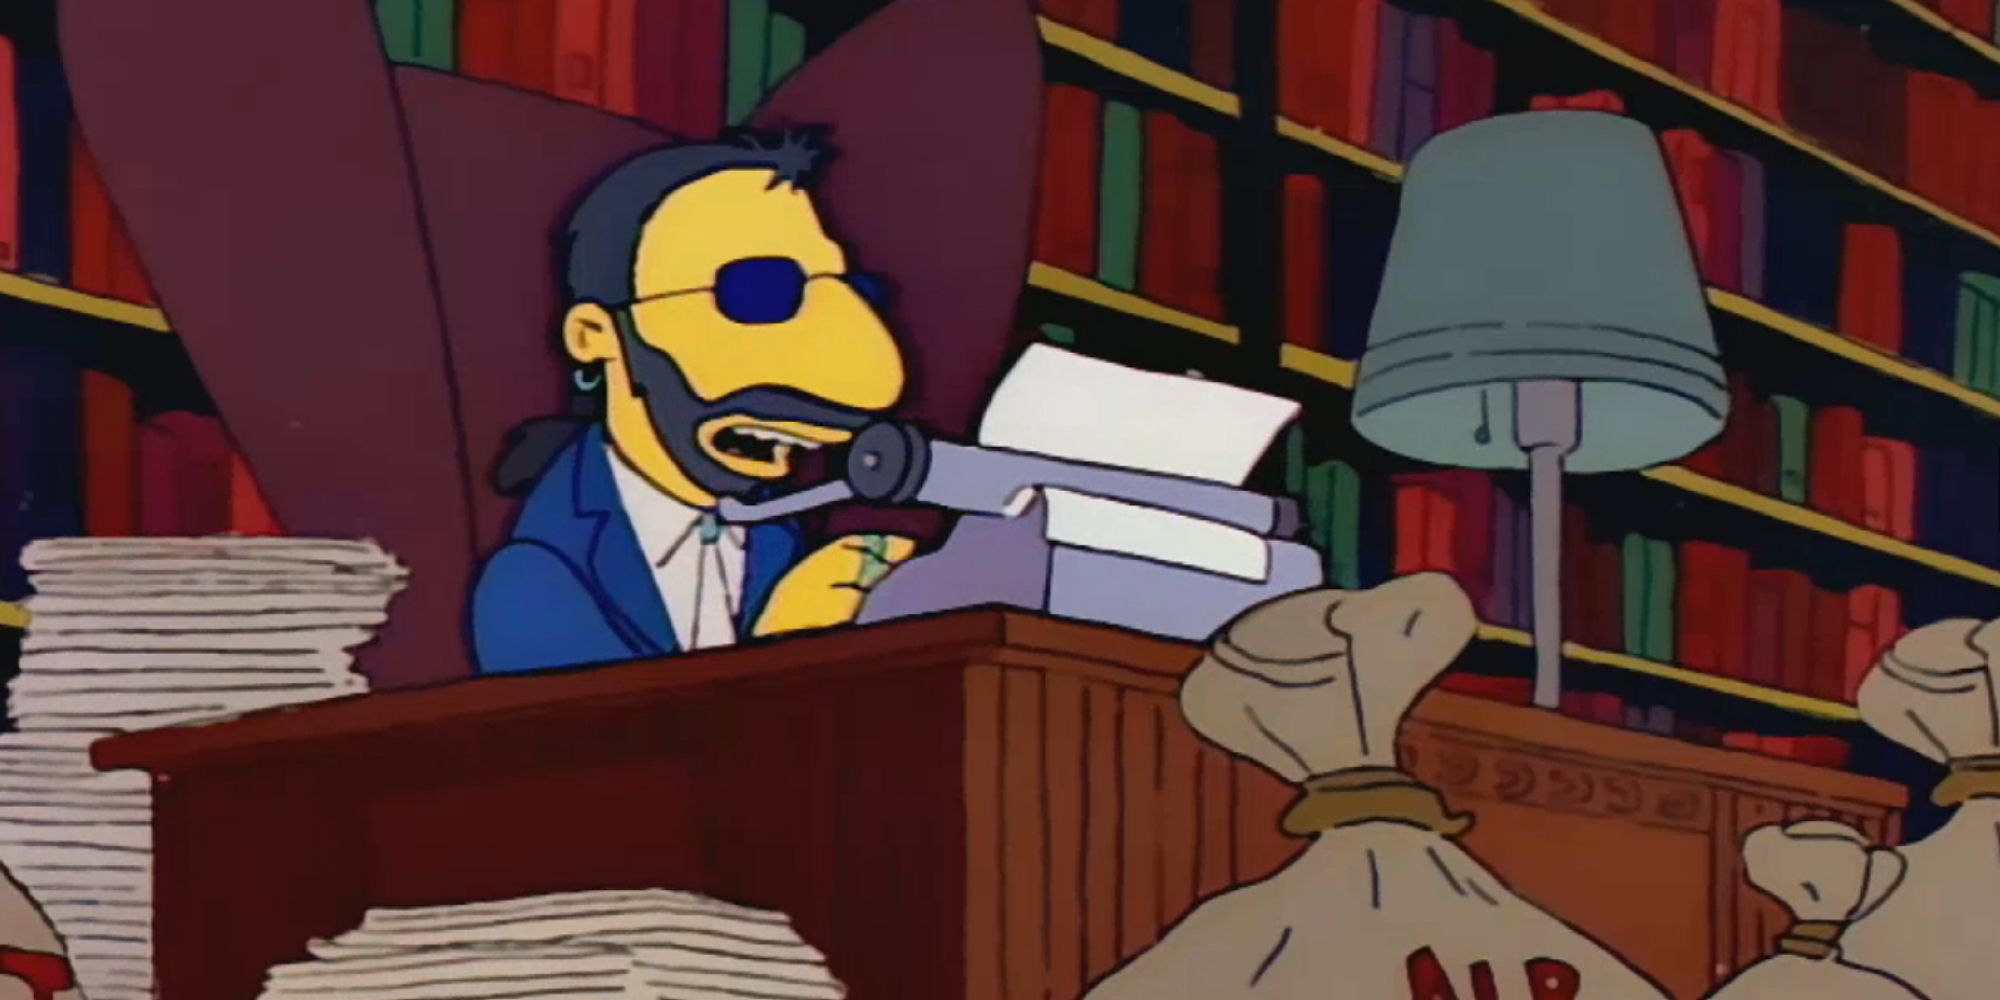 Ringo Starr answering fan mail in The Simpsons